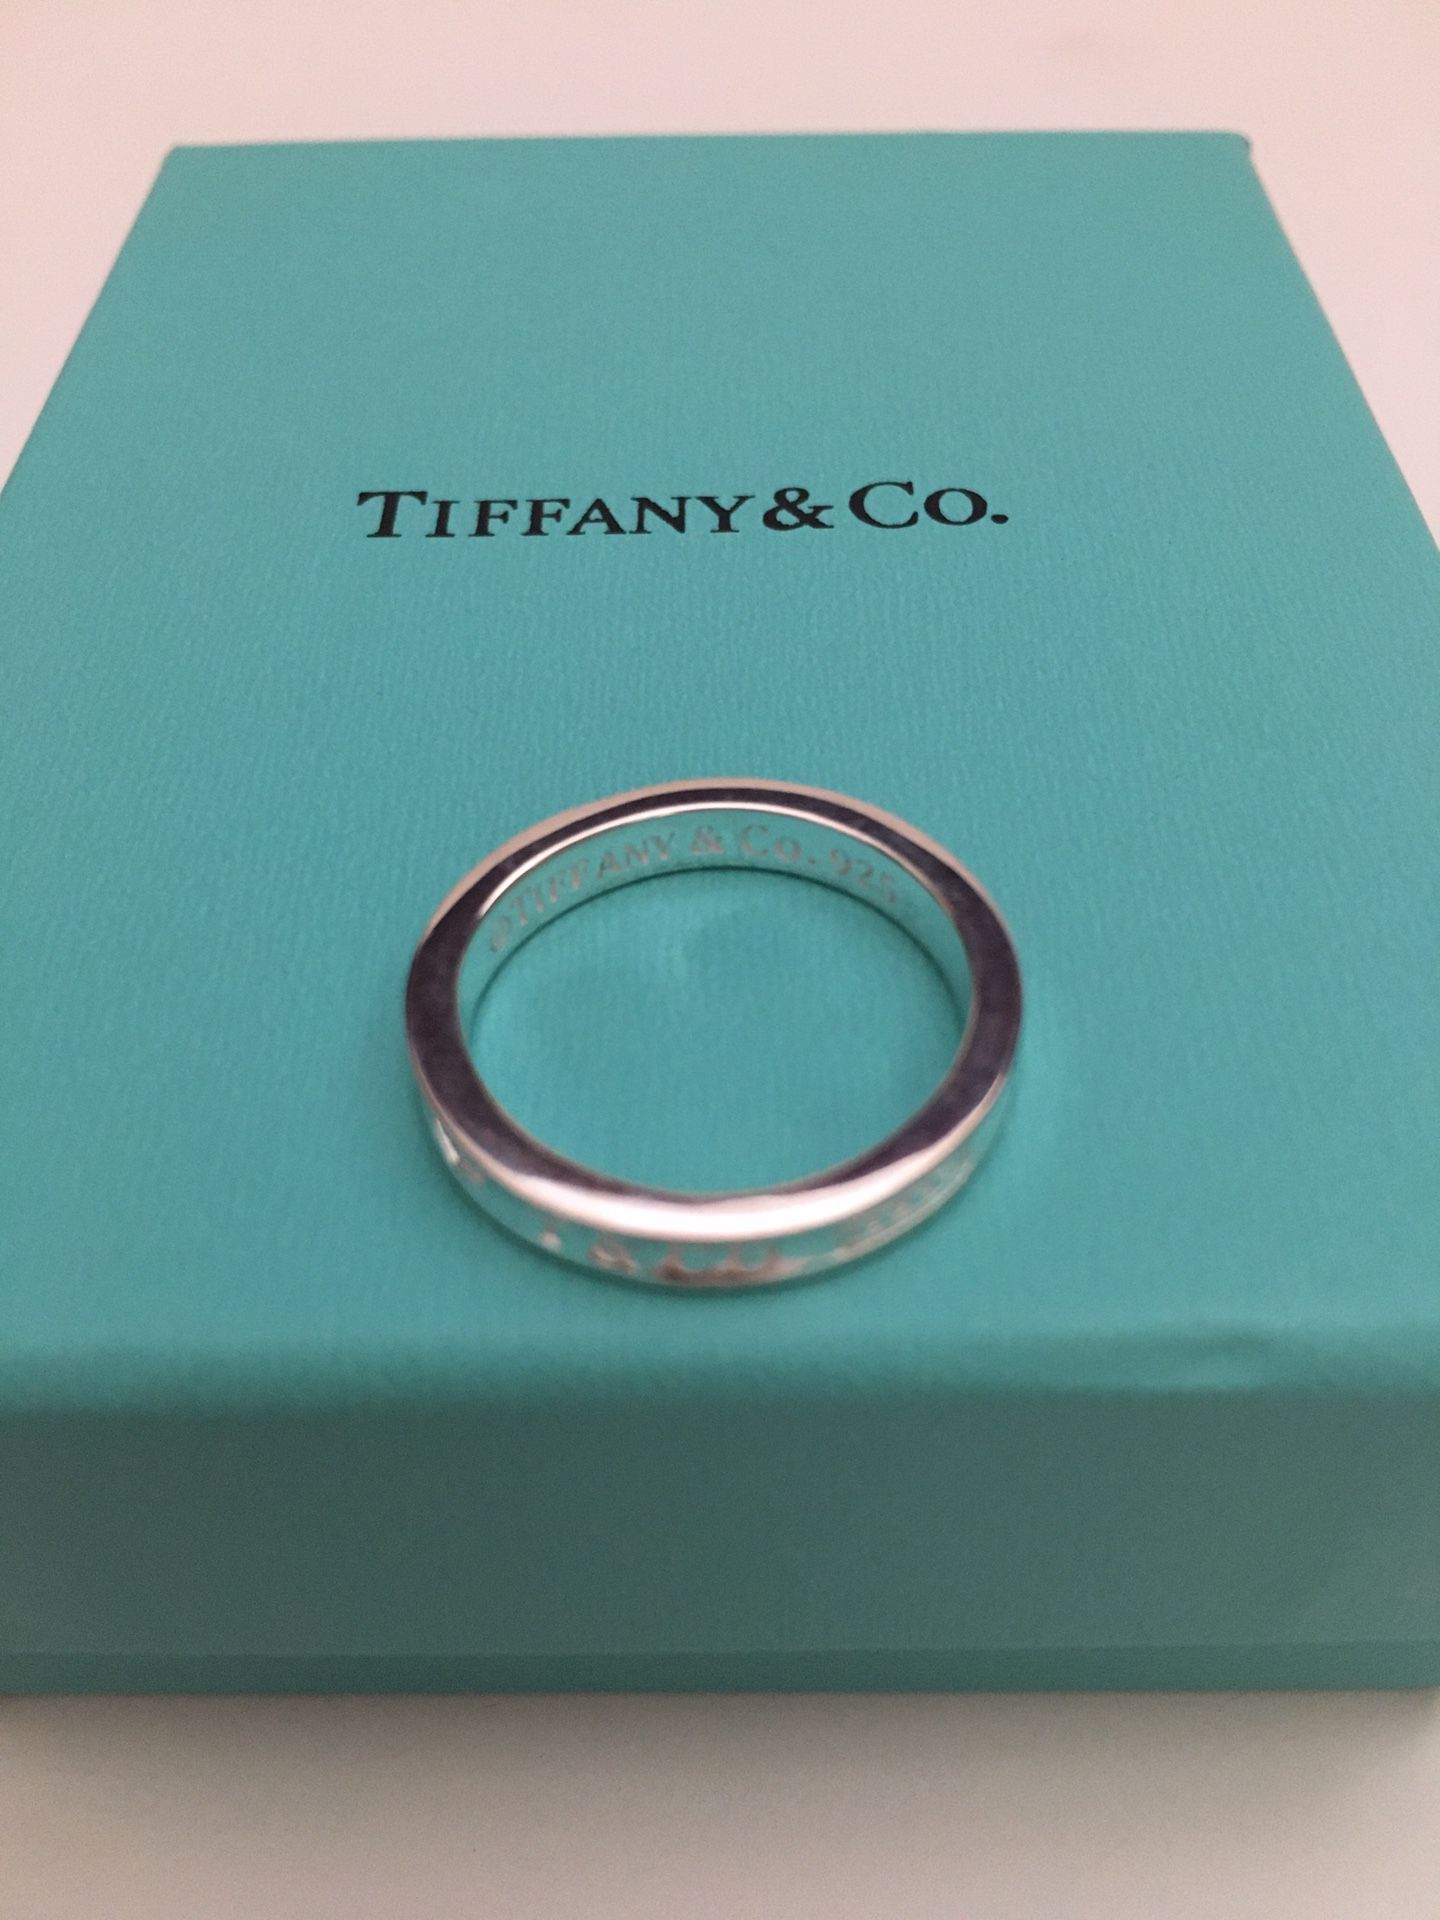 Tiffany Co.1837 Ring Narrow Concave Ring T & co 925 Sterling Silver Thin Band Ring Size 8